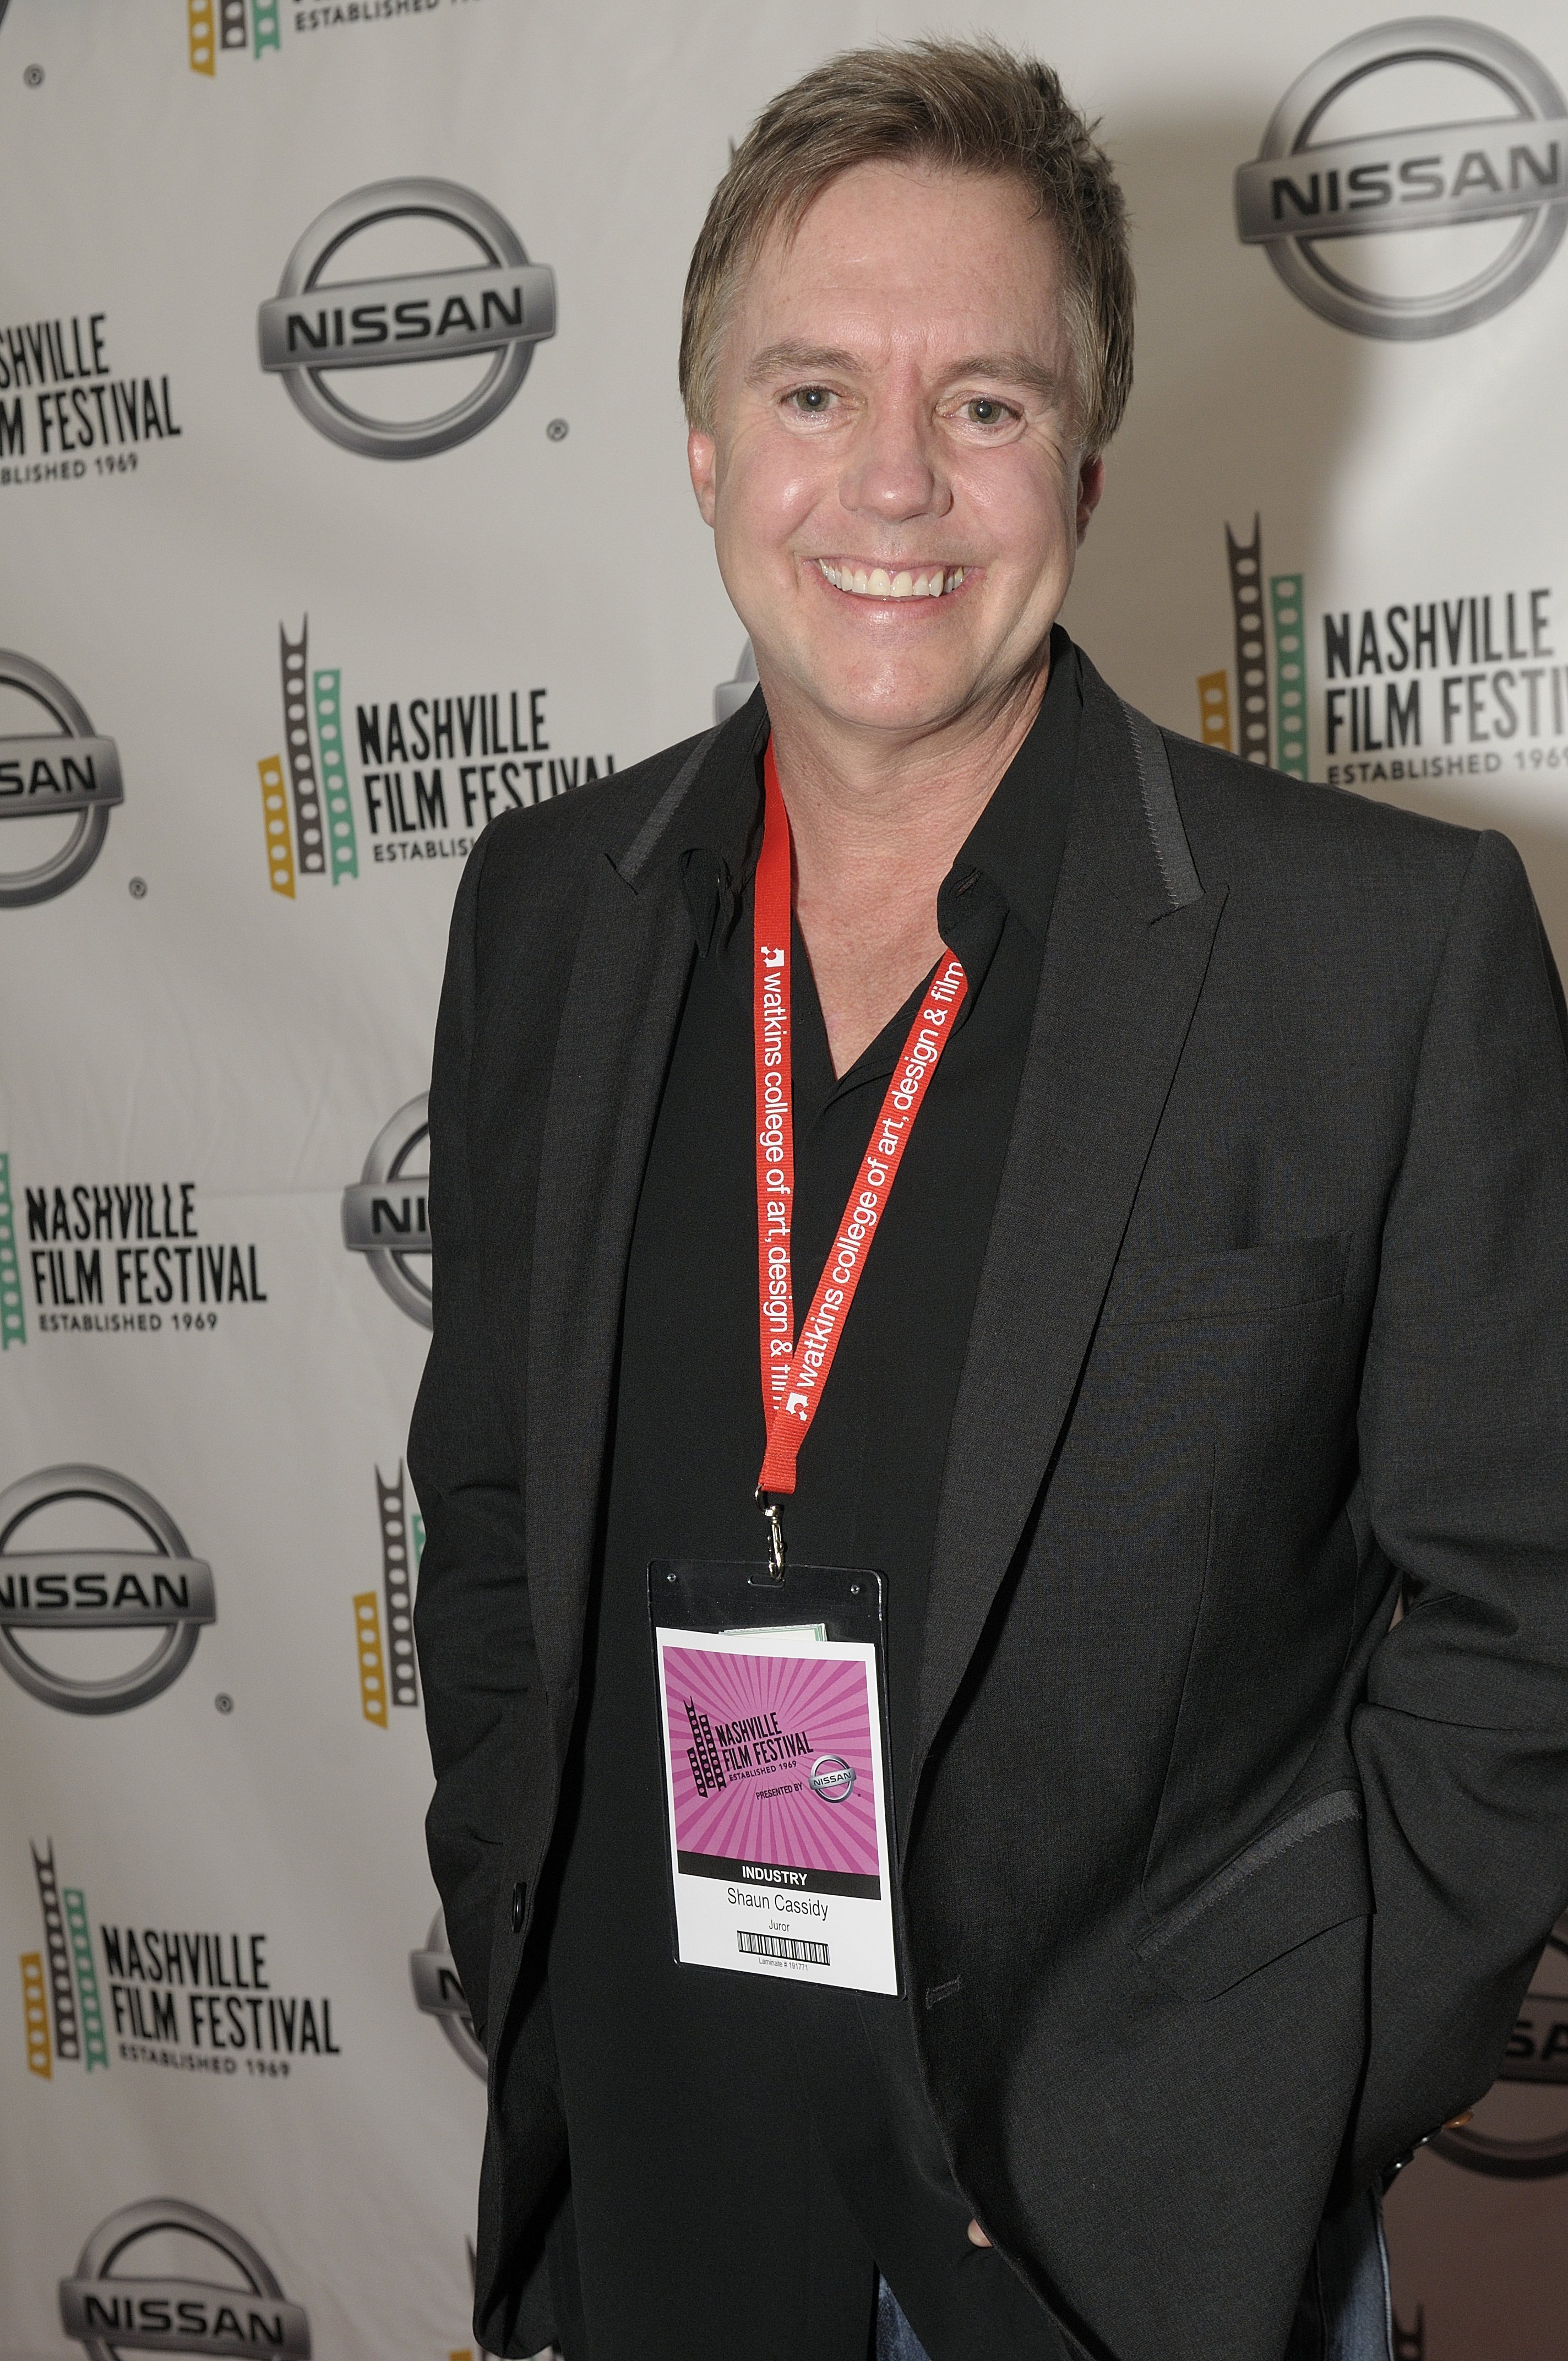 Shaun Cassidy attends the opening night of the 2011 in Nashville, Tennessee on April 14, 2011 | Photo: Getty Images